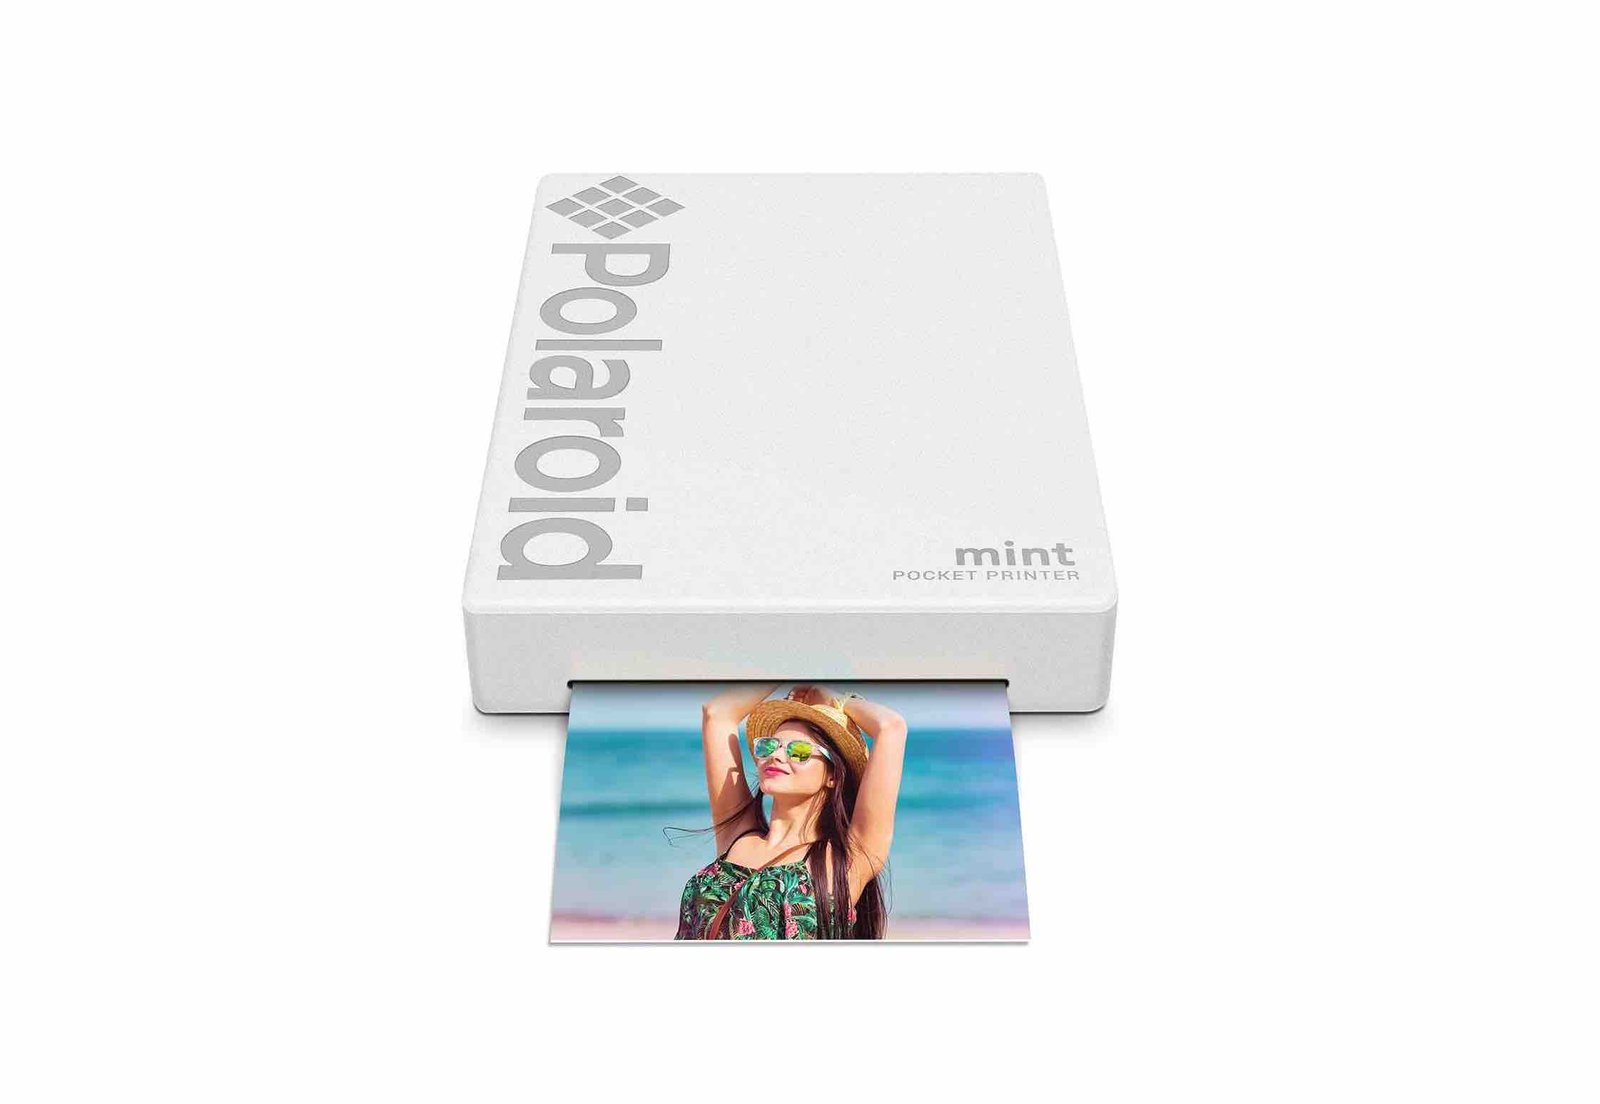 Polaroid Mint Pocket Printer W: Zink Zero Ink Technology & Built-In Bluetooth for Android & iOS Devices